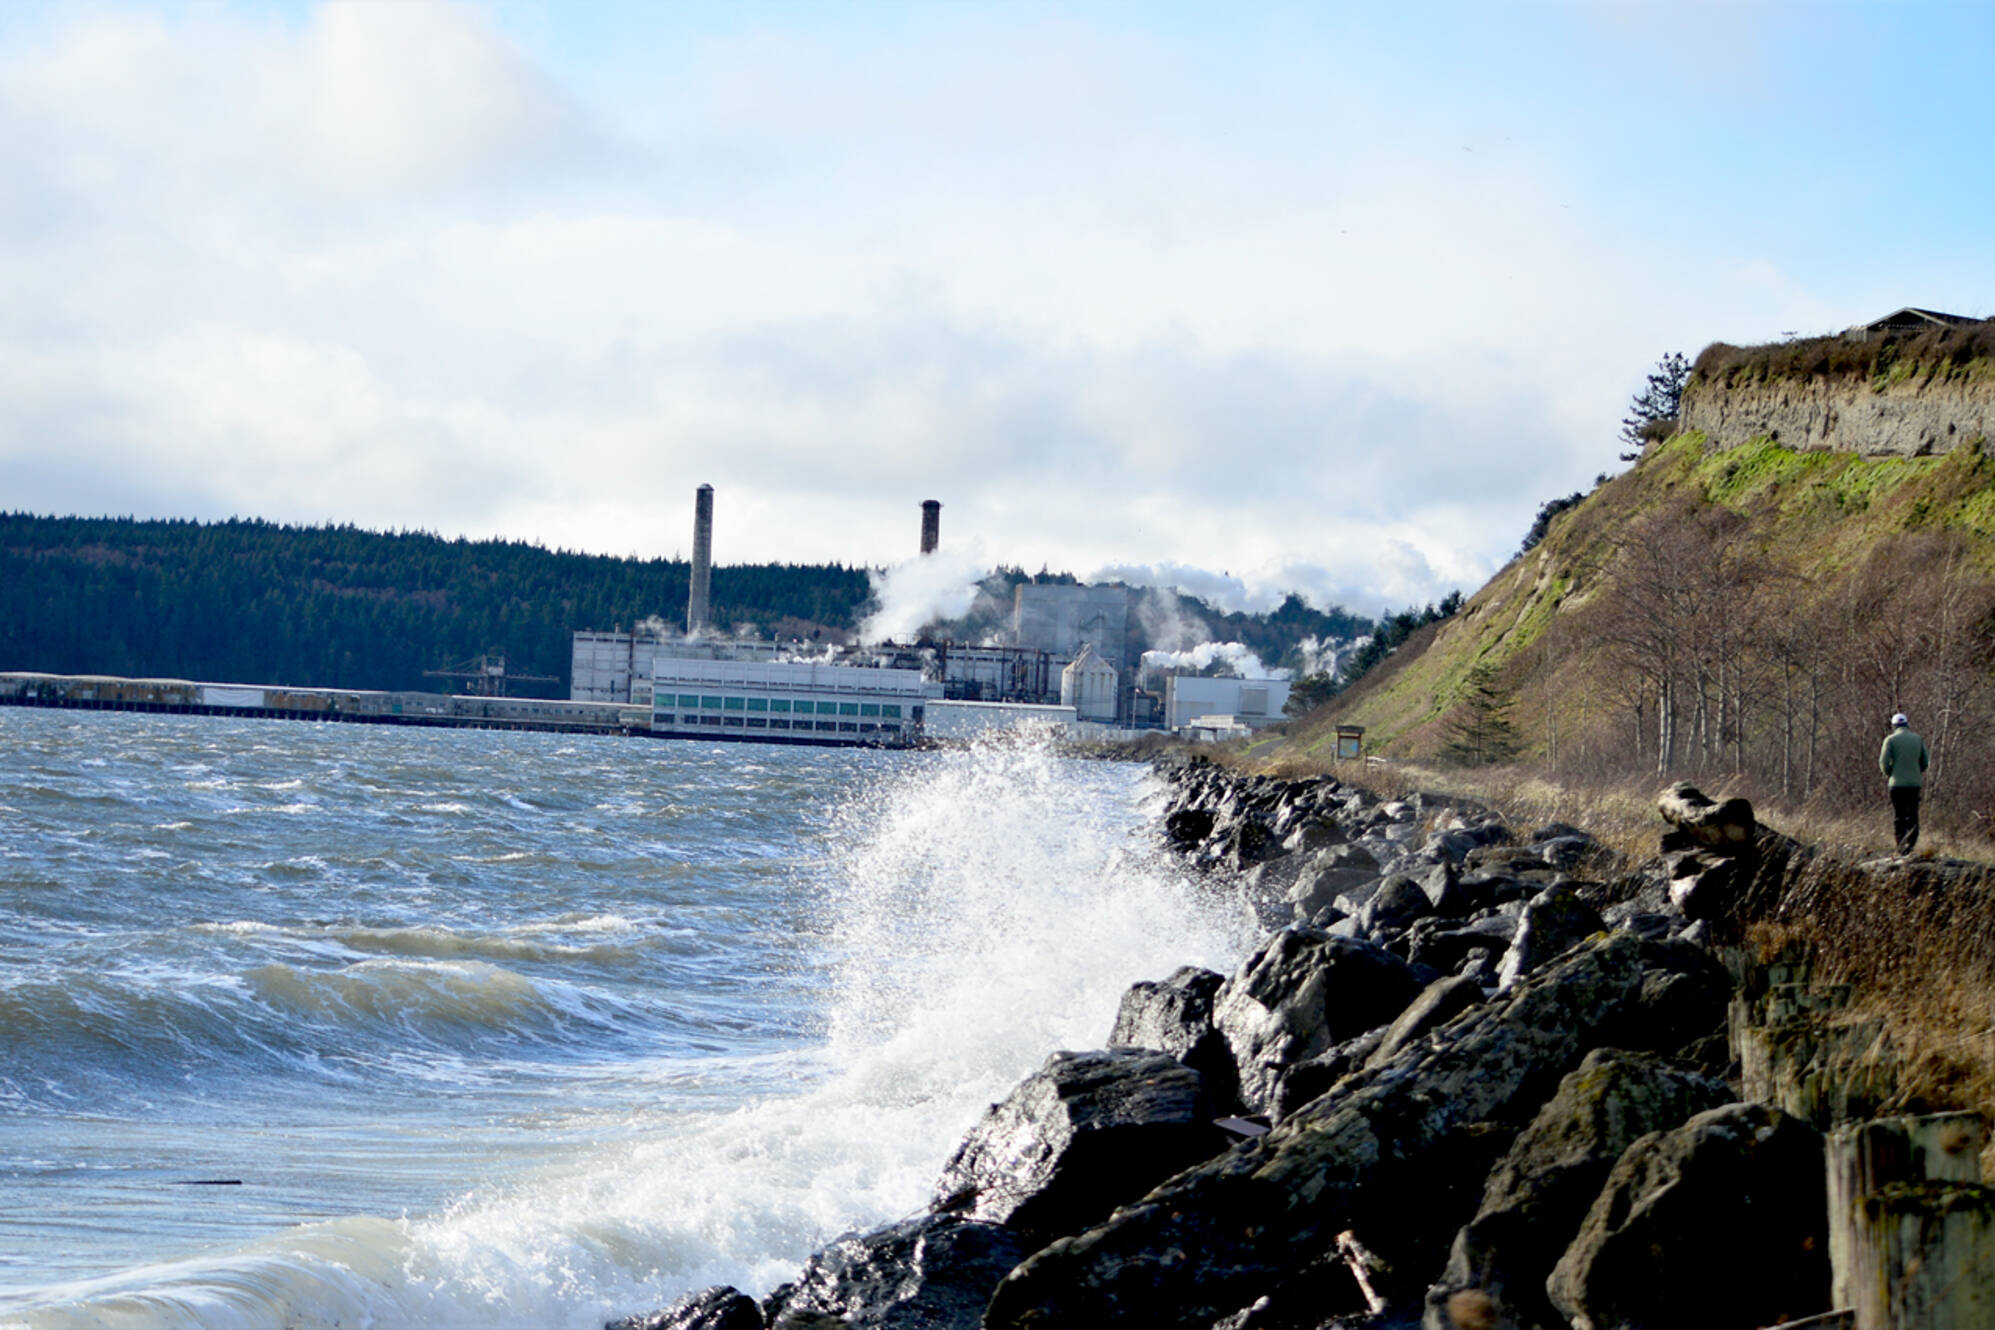 A lone pedestrian walks the Larry Scott Trail toward the Port Townsend Paper Mill on Monday morning as a stiff wind whips up the waves nearby. (Diane Urbani de la Paz/Peninsula Daily News)